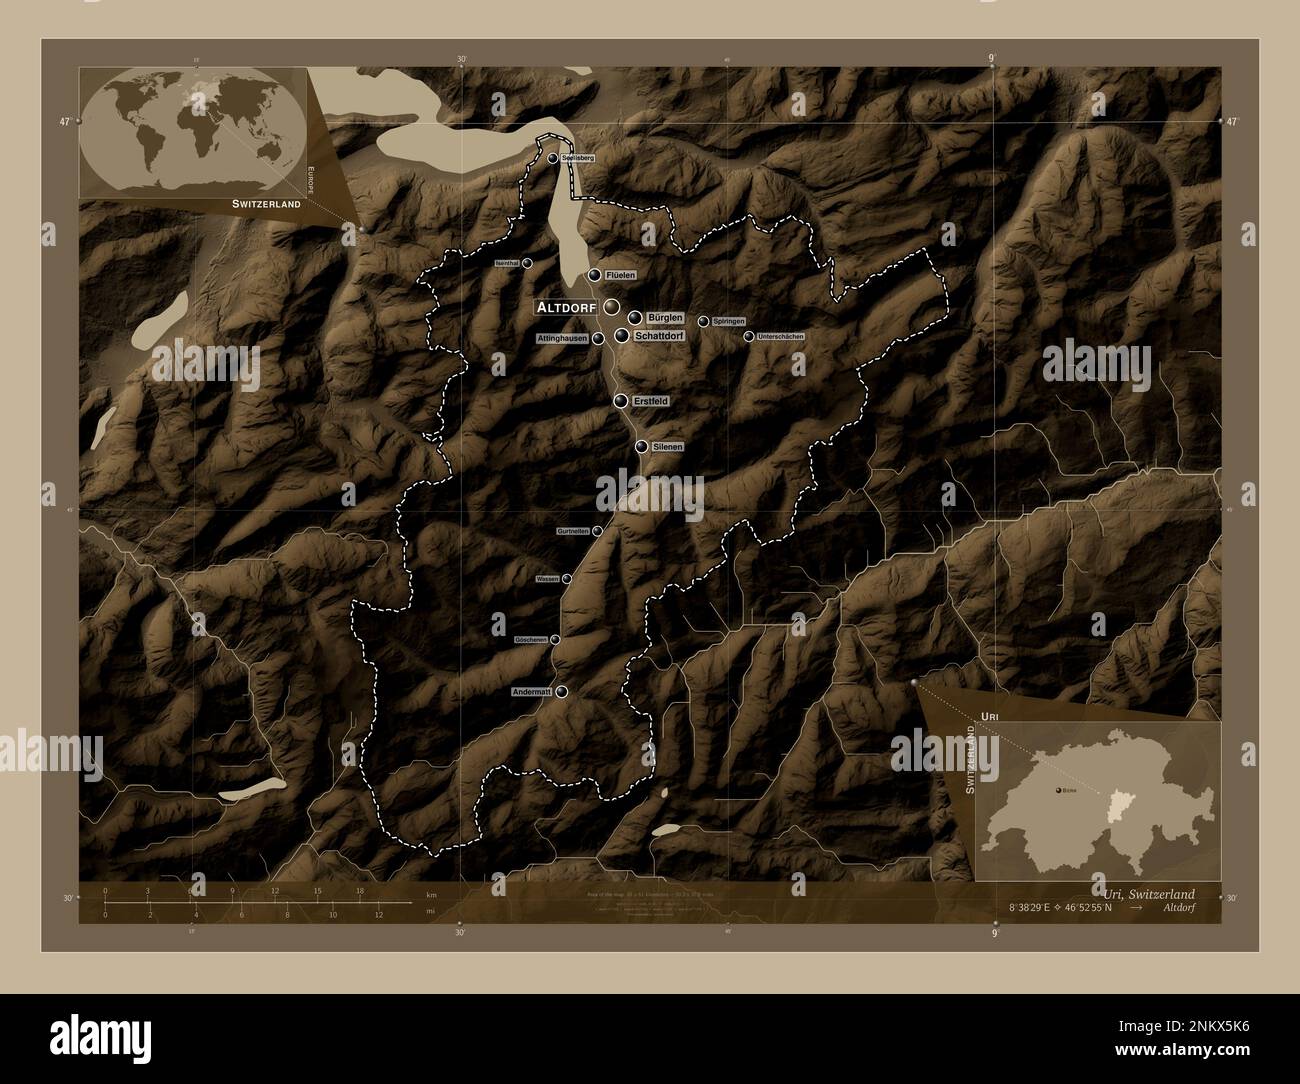 Uri, canton of Switzerland. Elevation map colored in sepia tones with lakes and rivers. Locations and names of major cities of the region. Corner auxi Stock Photo